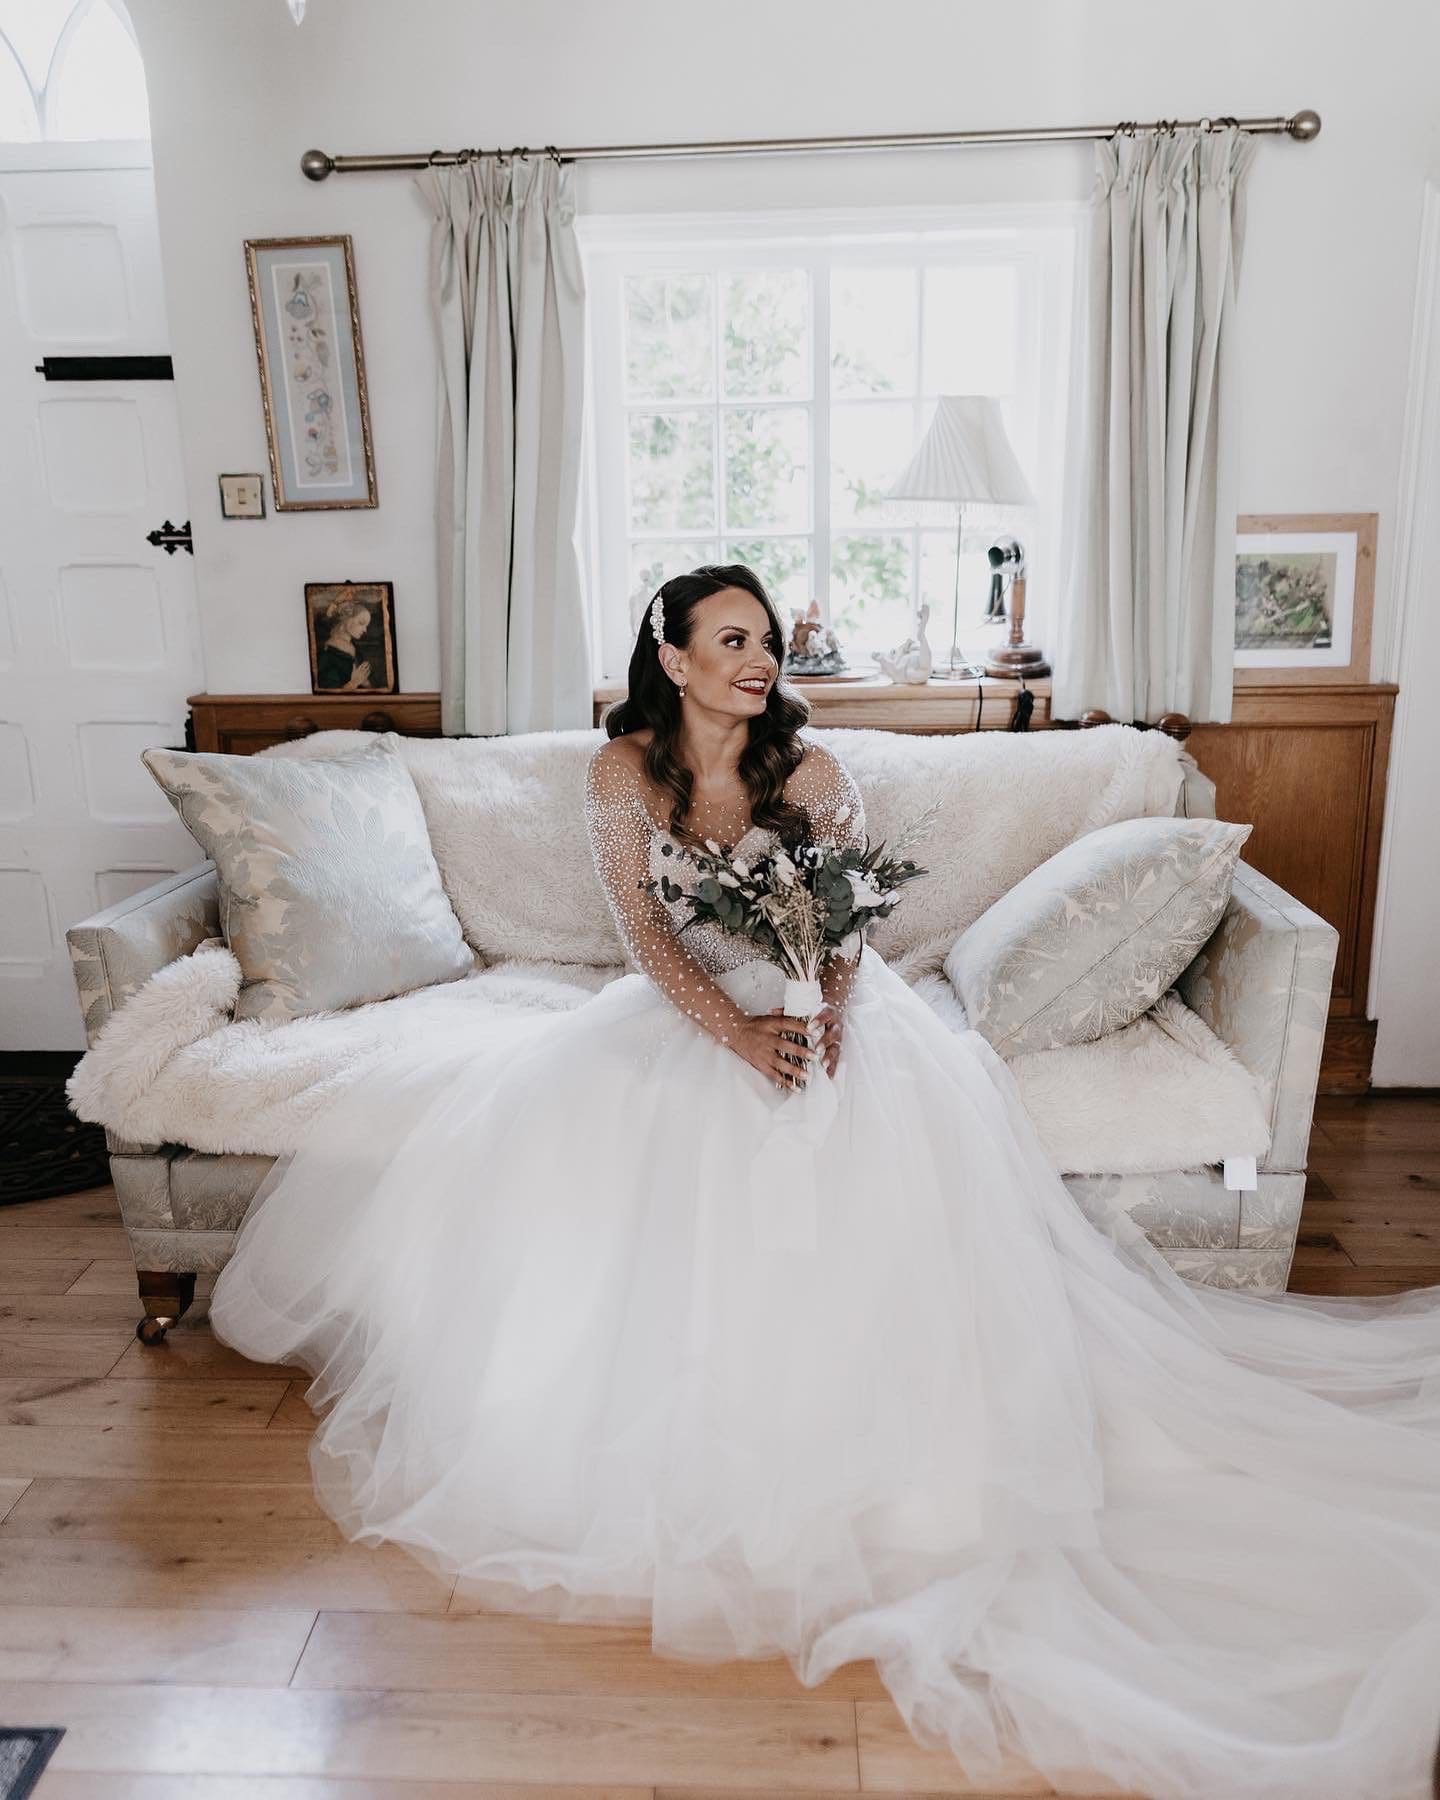 Hannah chose the stunning Rosette by Maggie Sottero for her wedding gown